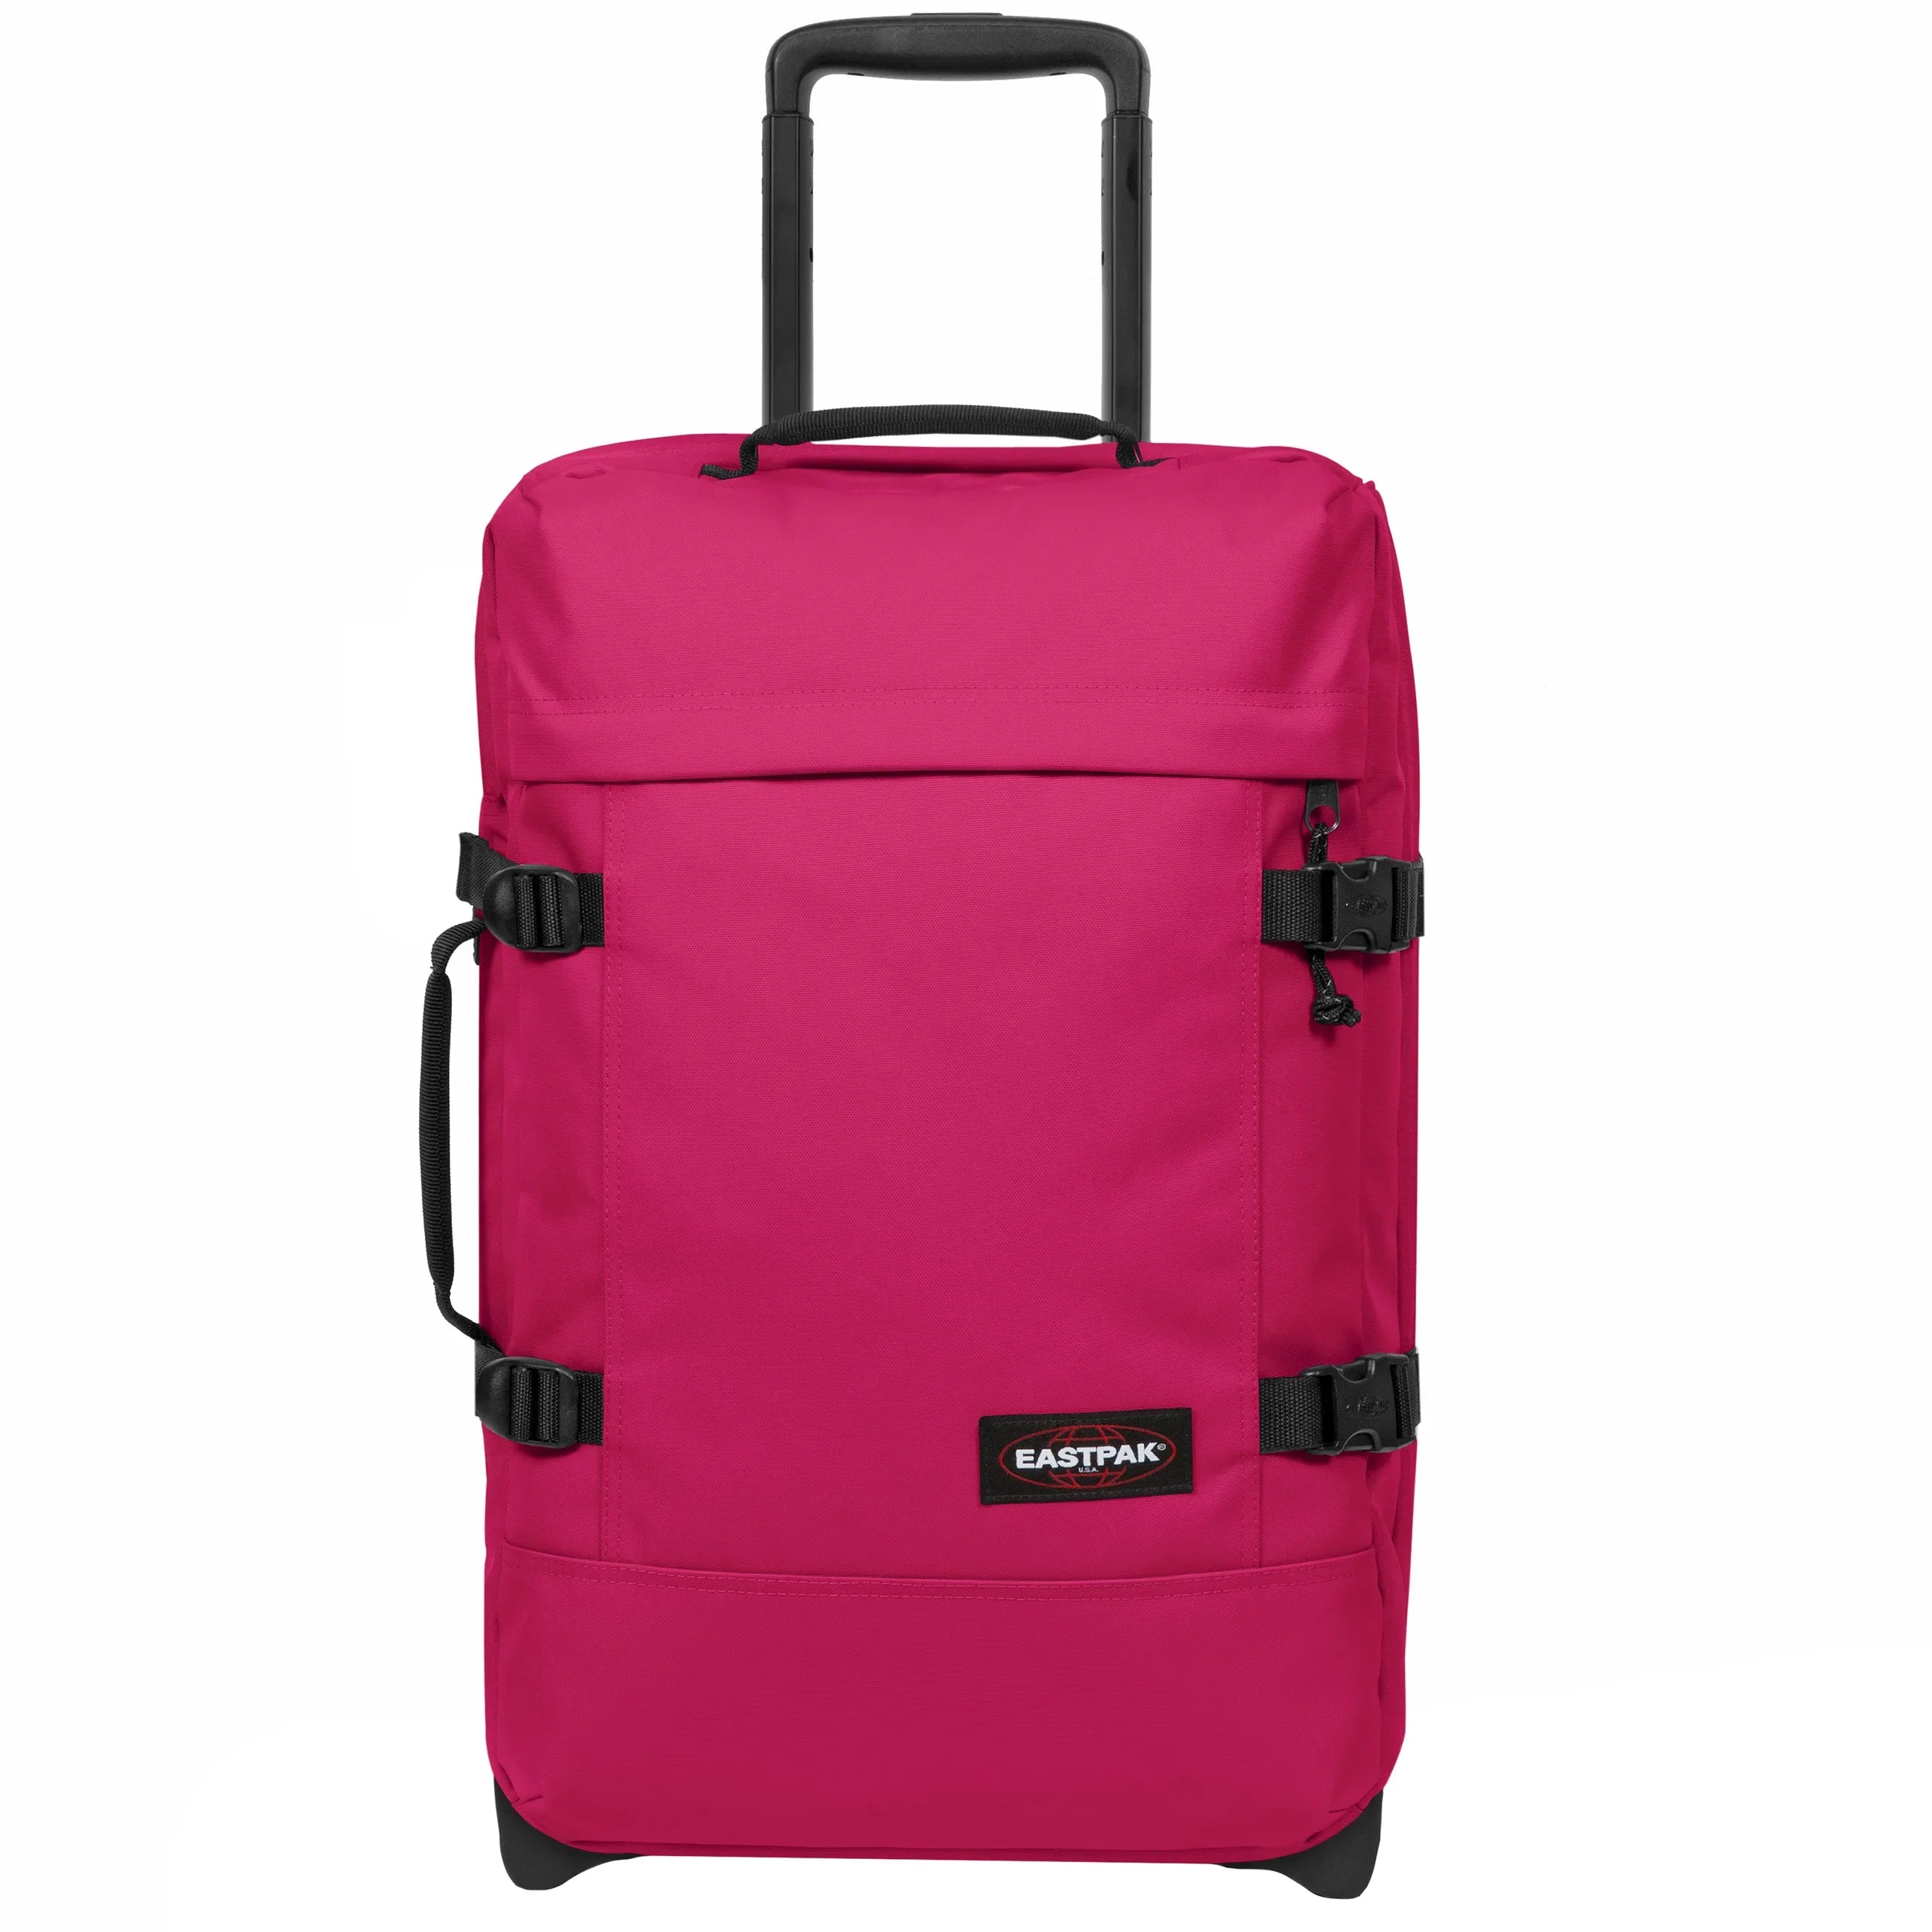 Eastpak Authentic Travel Tranverz 2-roll cabin trolley 51 cm - Ruby Pink